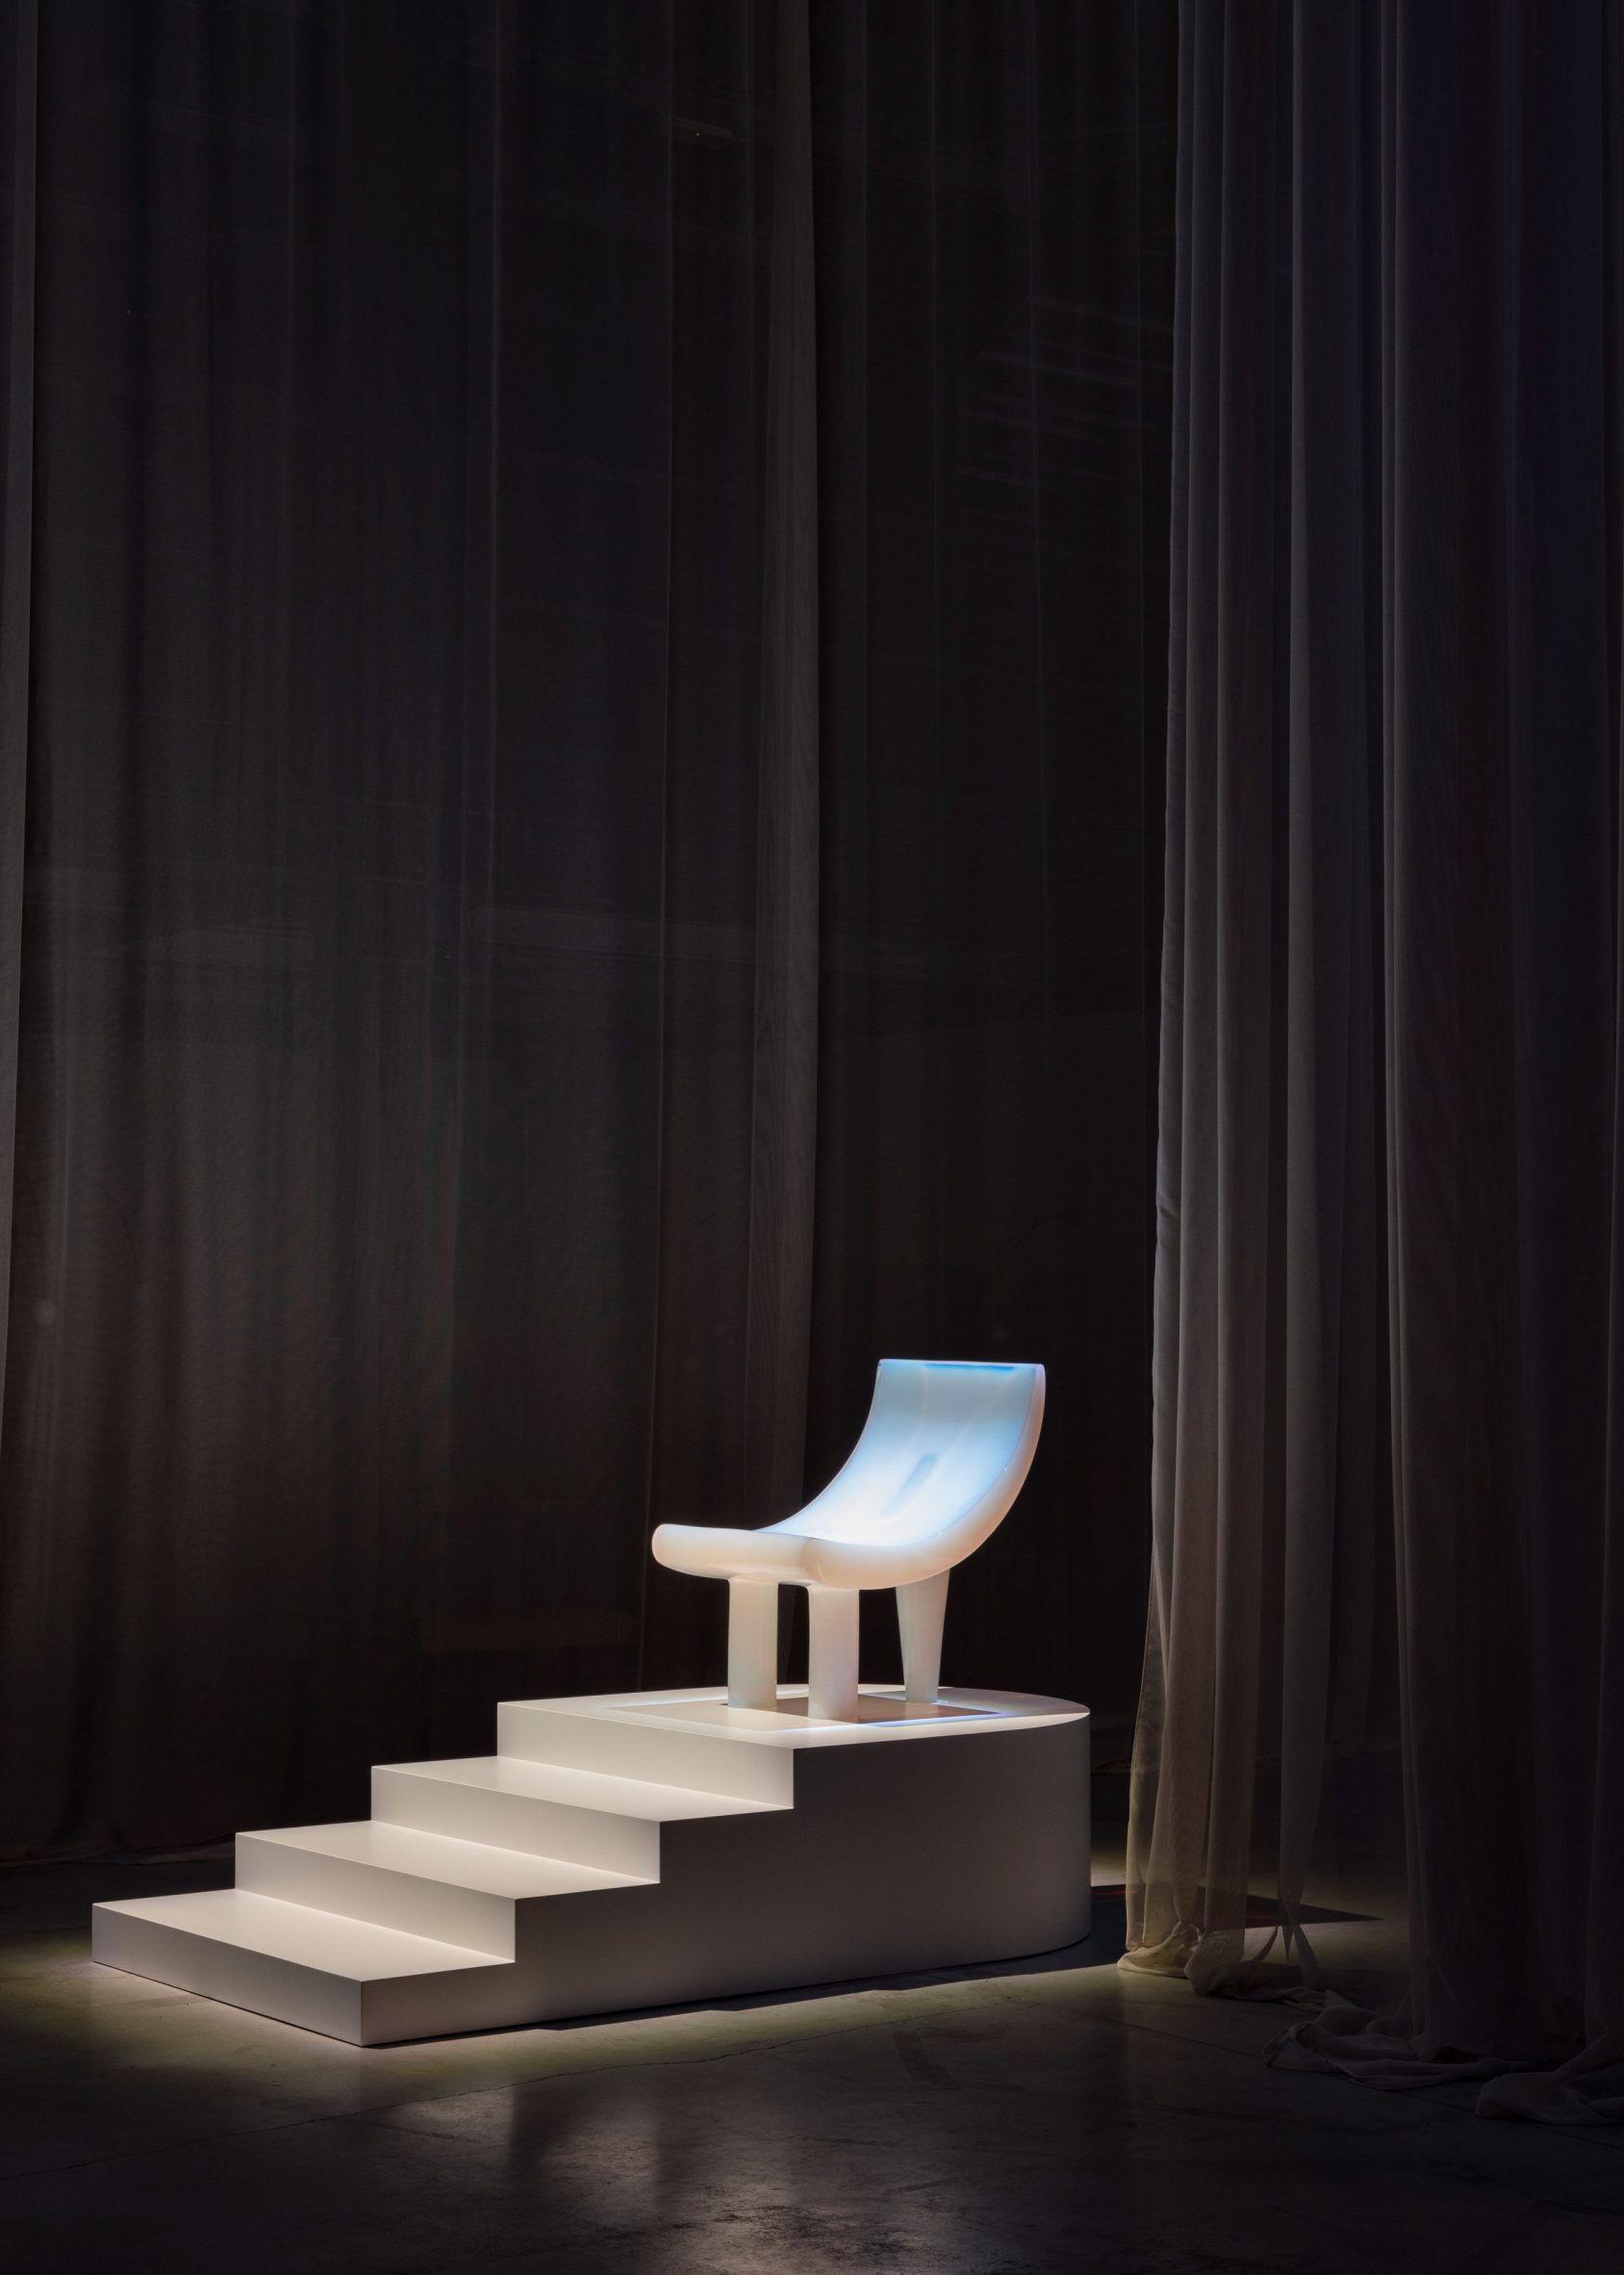 Klisis chair for Poikilos at Poikilos resin furniture exhibition by Objects of Common Interest at Nilufar Depot in Milan